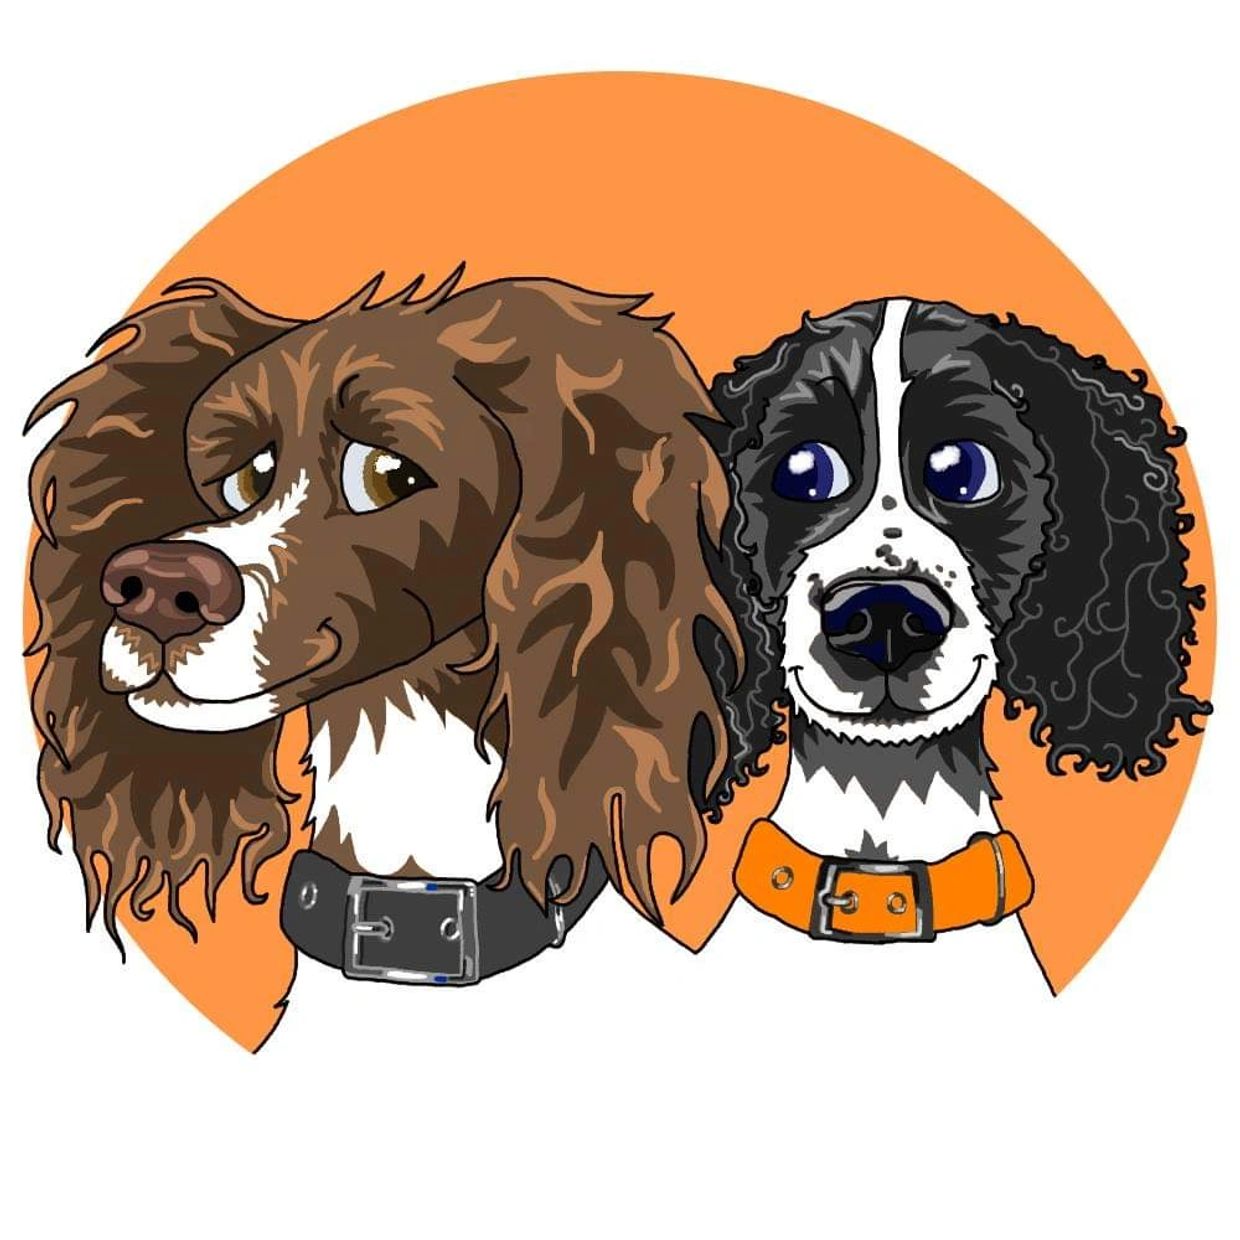 Olly and Mac, our 2 spaniels and our inspiration for our logo